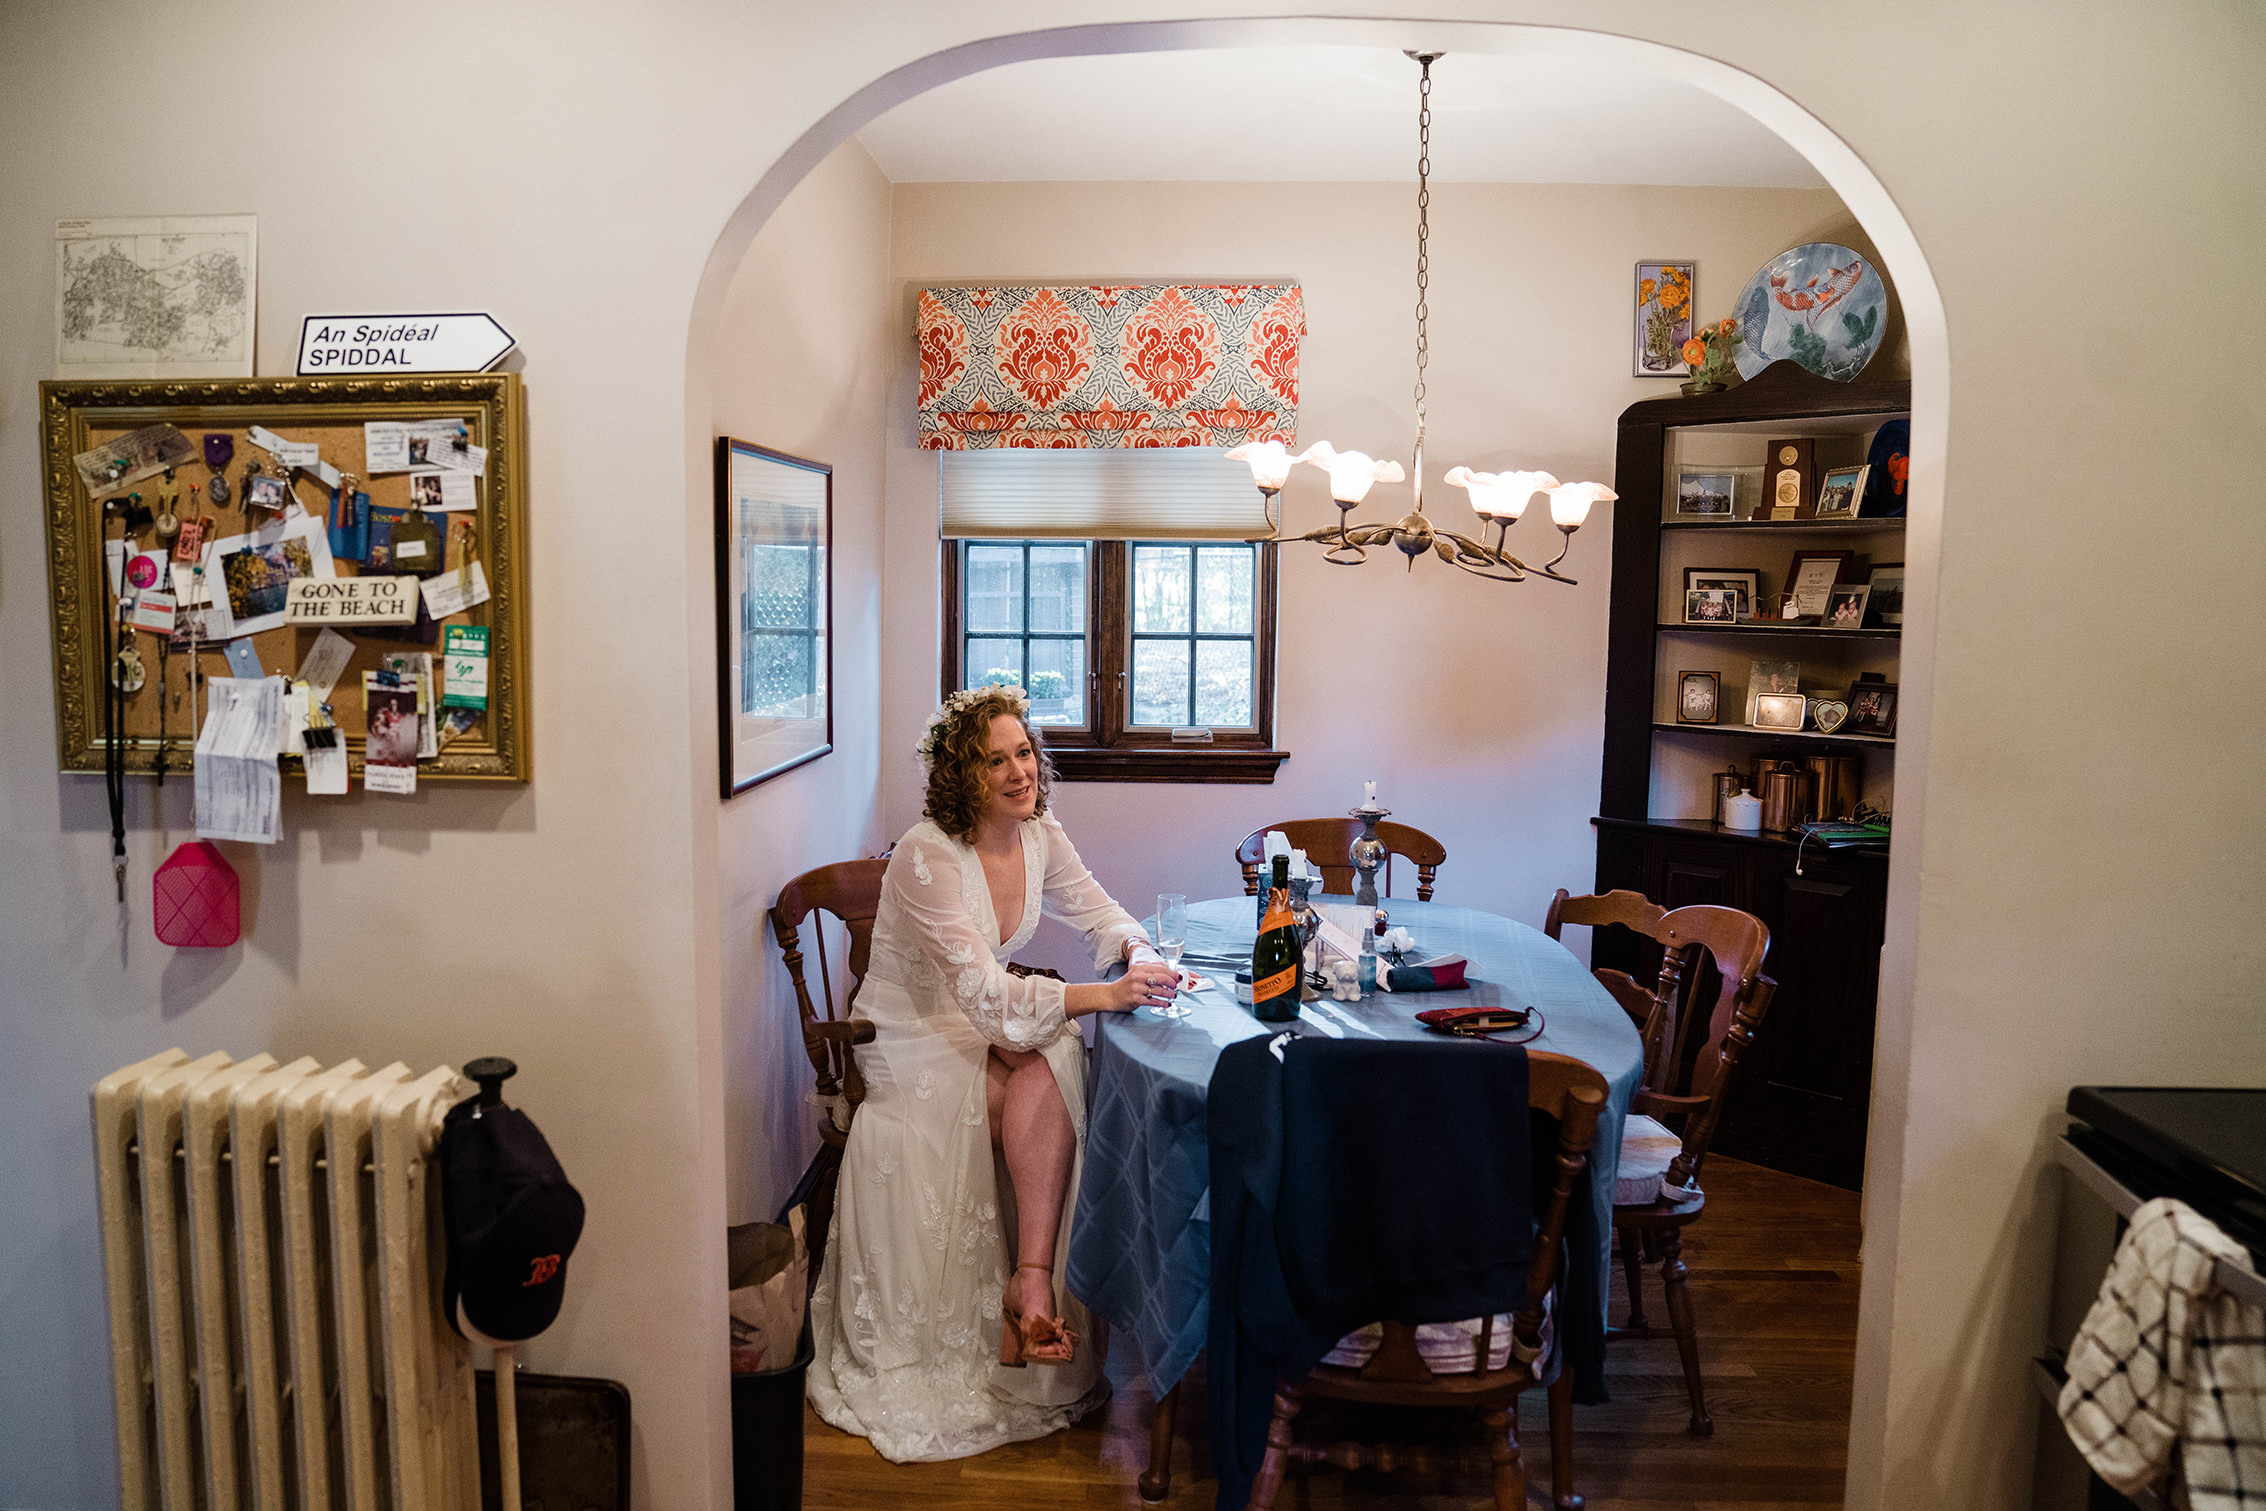 A documentary photograph featured in the best of wedding photography of 2019 showing a bride having a glass of champagne in her kitchen